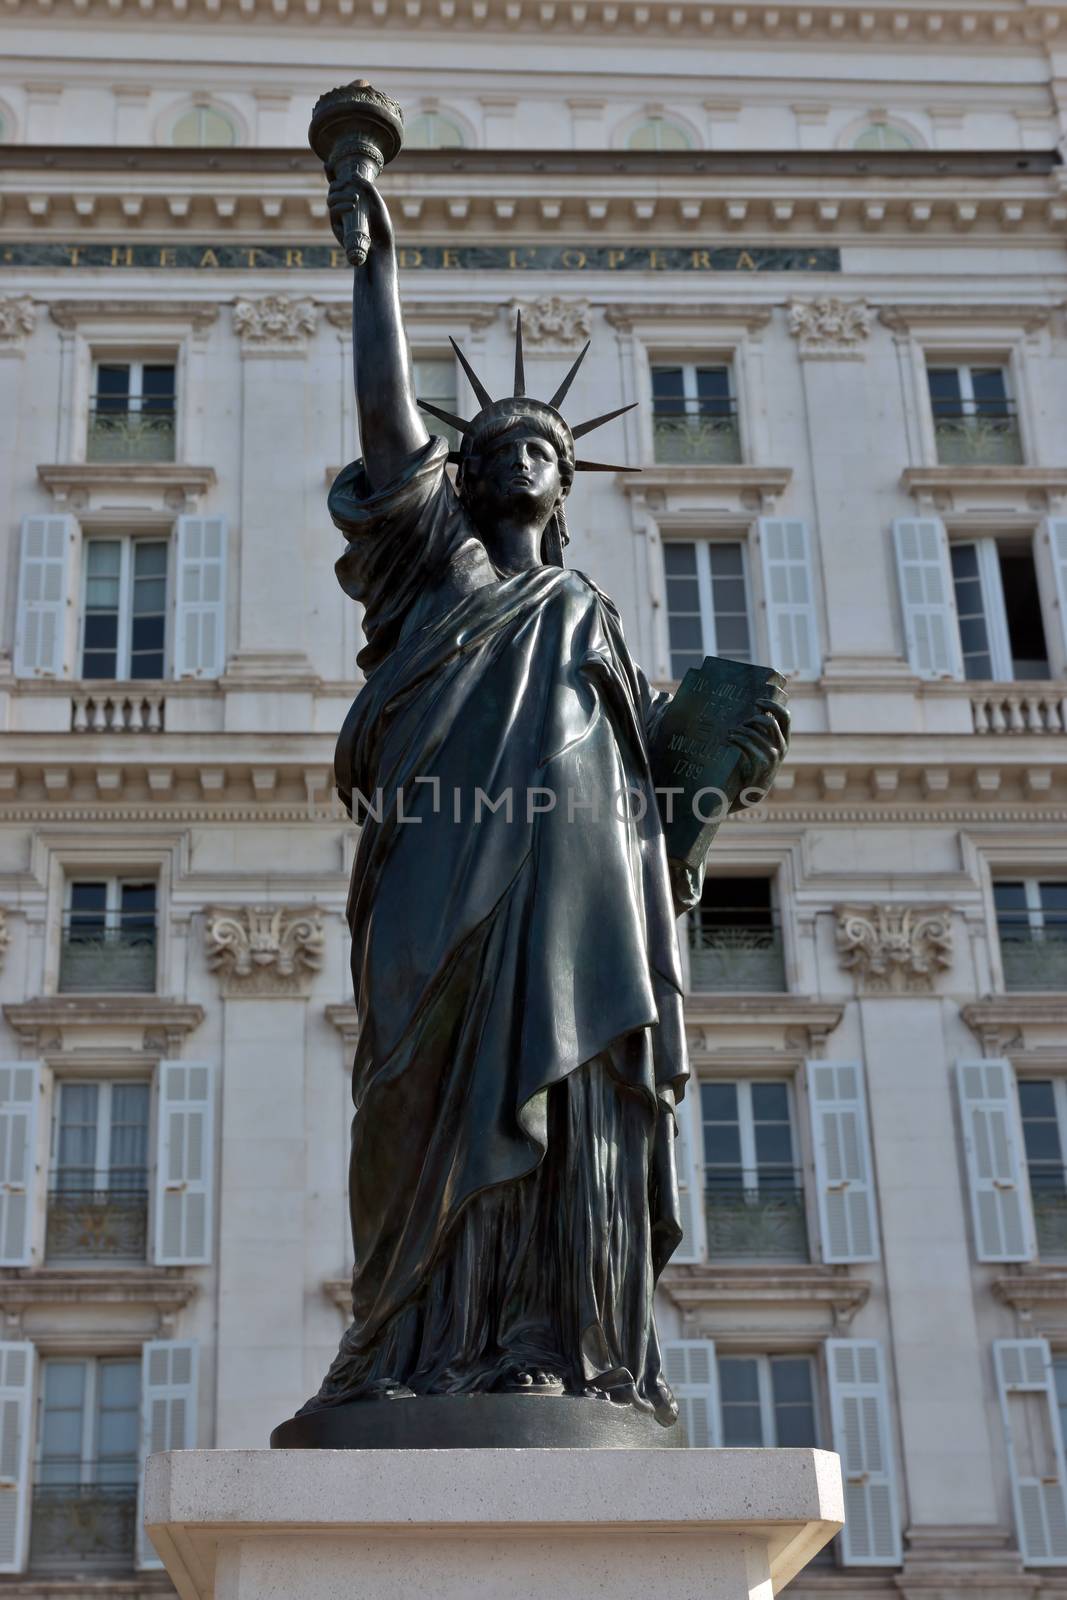 City of Nice - Statue of Liberty by Venakr